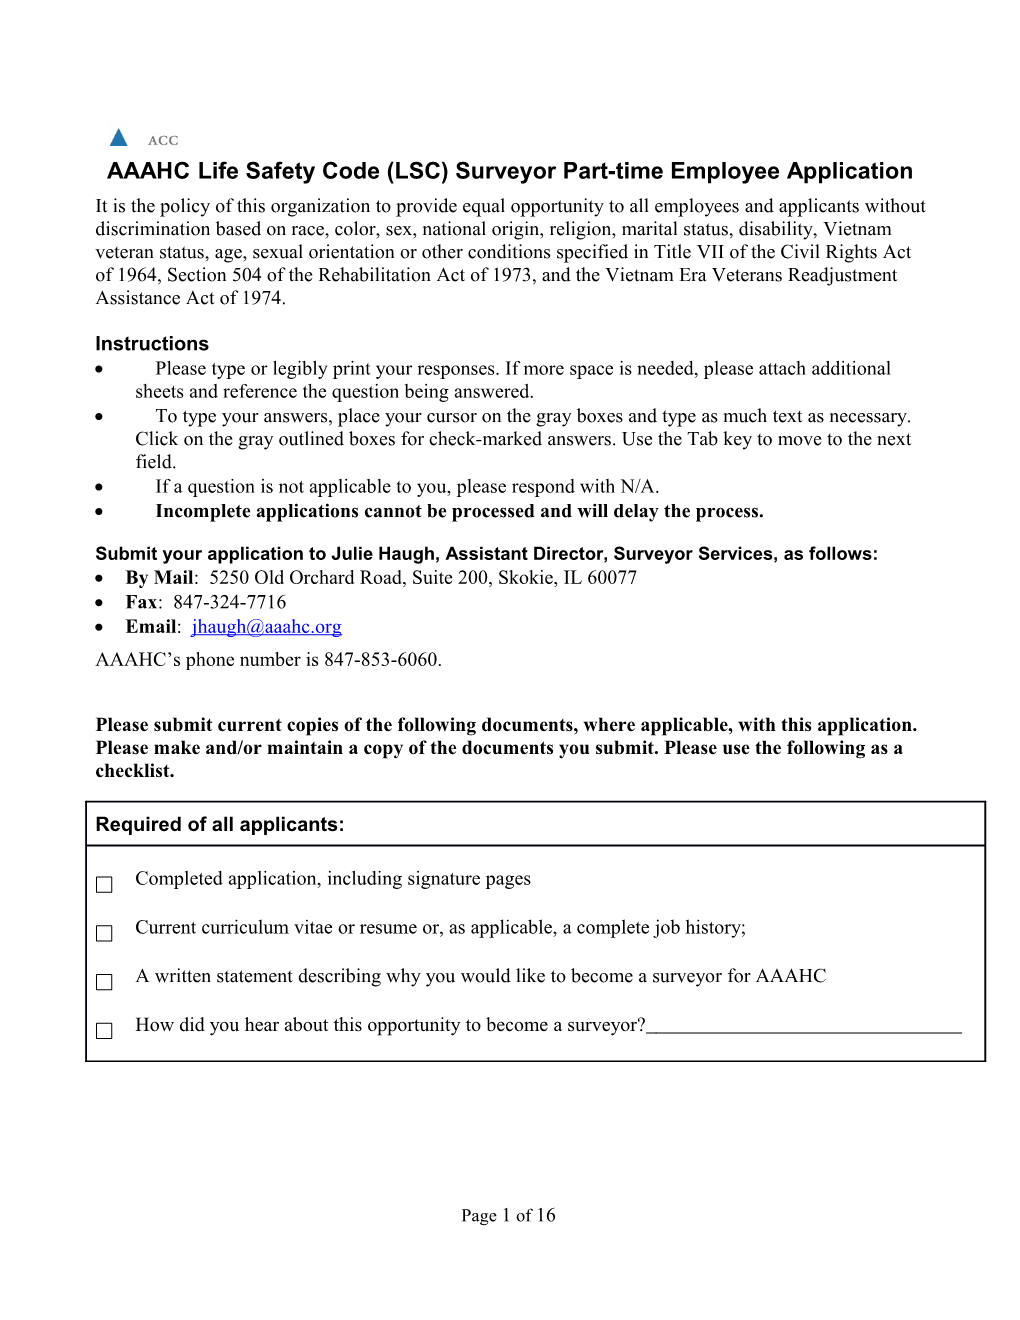 AAAHC Life Safety Code (LSC)Surveyorpart-Time Employee Application